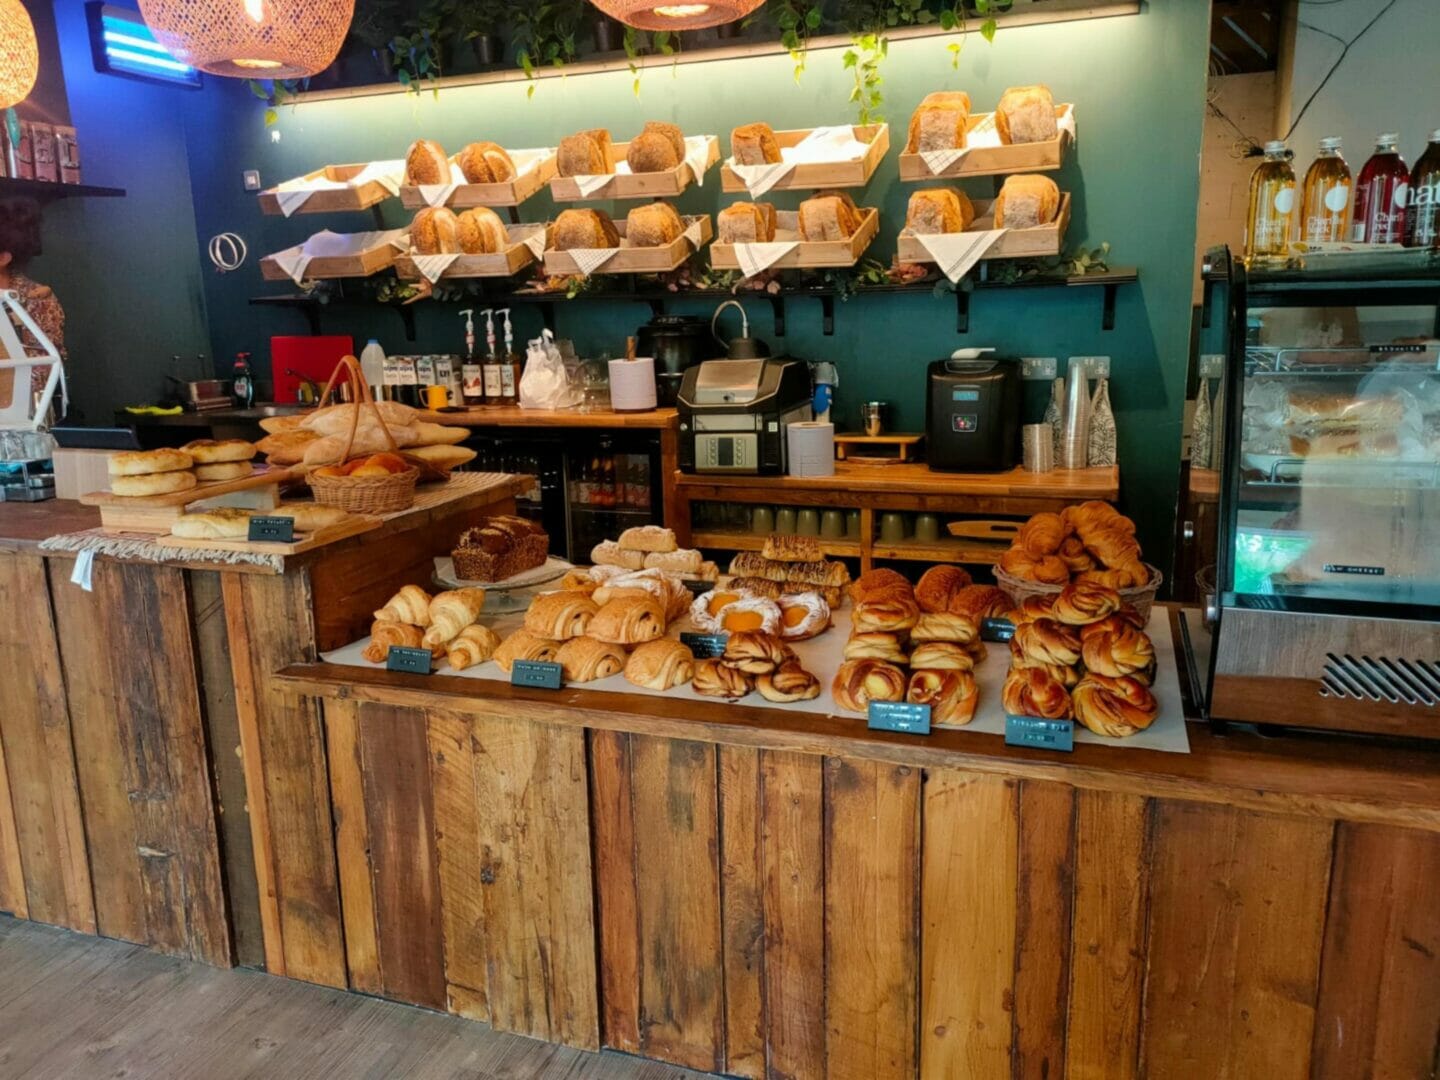 CHARLES ARTISAN BREAD OPENS SECOND SITE IN STRATFORD